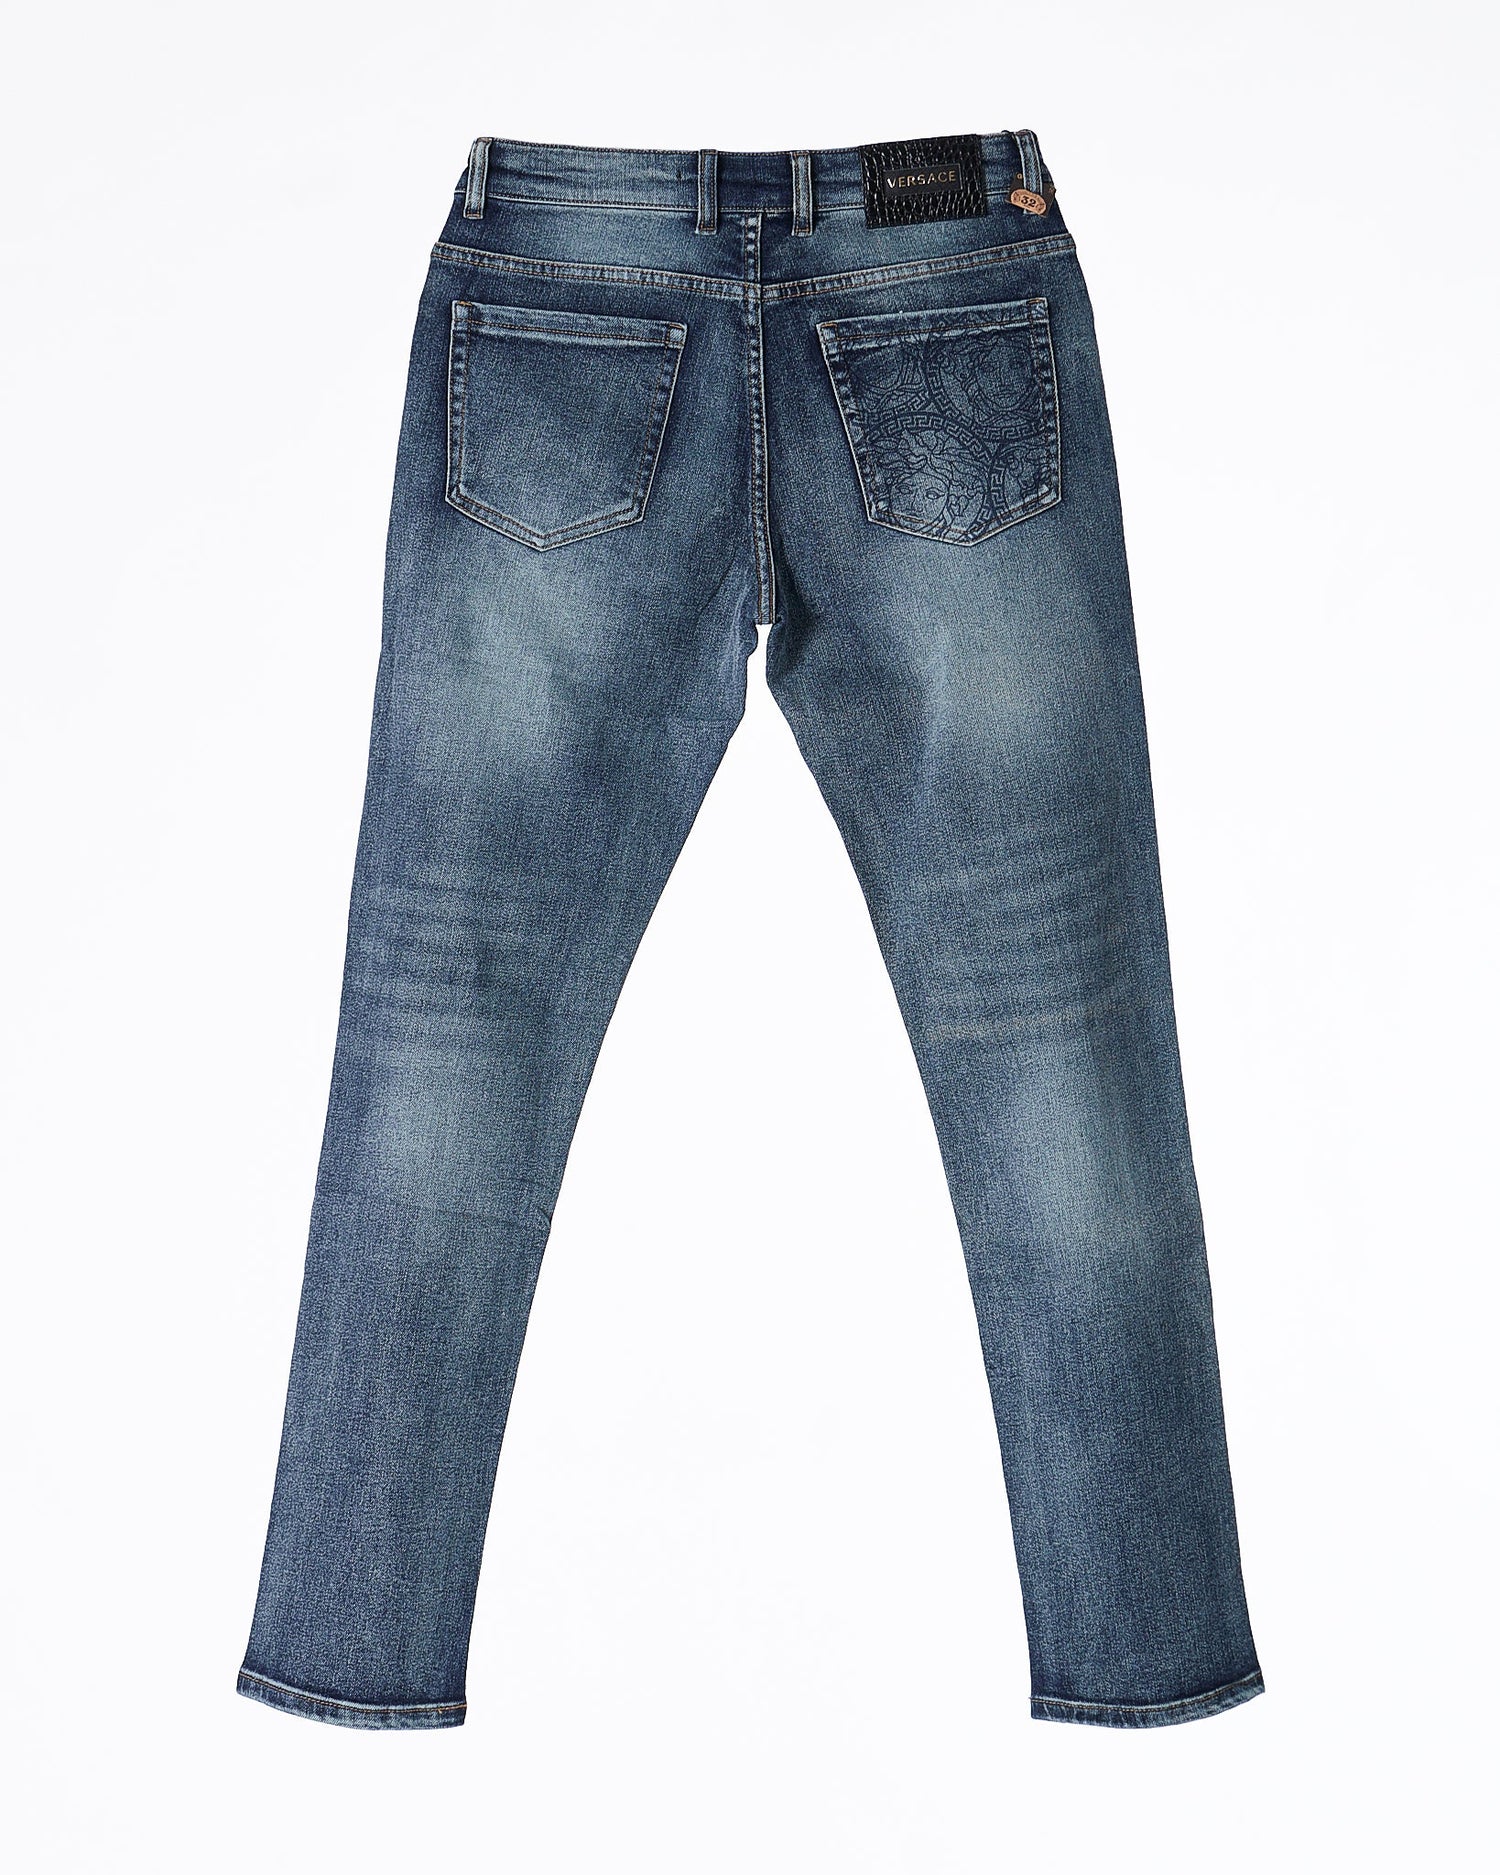 MOI OUTFIT-CD Logo Embroidered Men Jeans 69.90